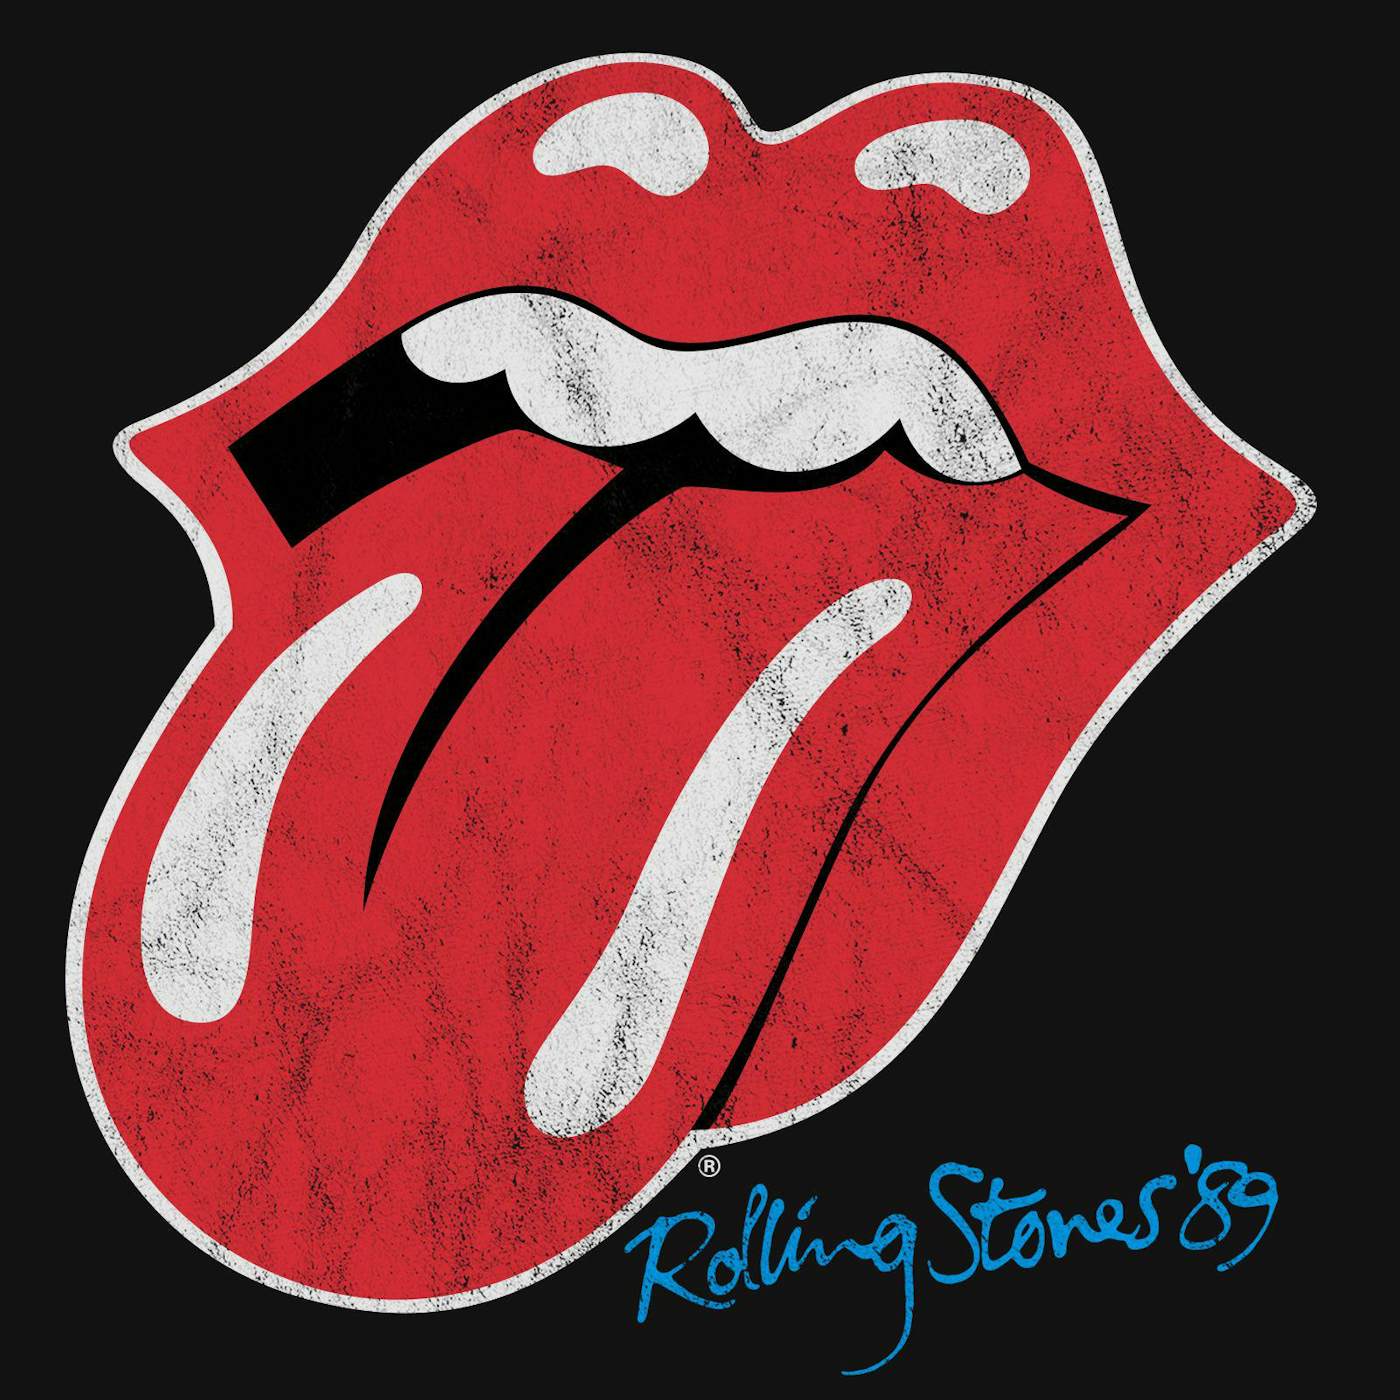 Shirt Stones Distressed T-Shirt \'89 Rolling Tongue Logo The The Classic Stones | Rolling